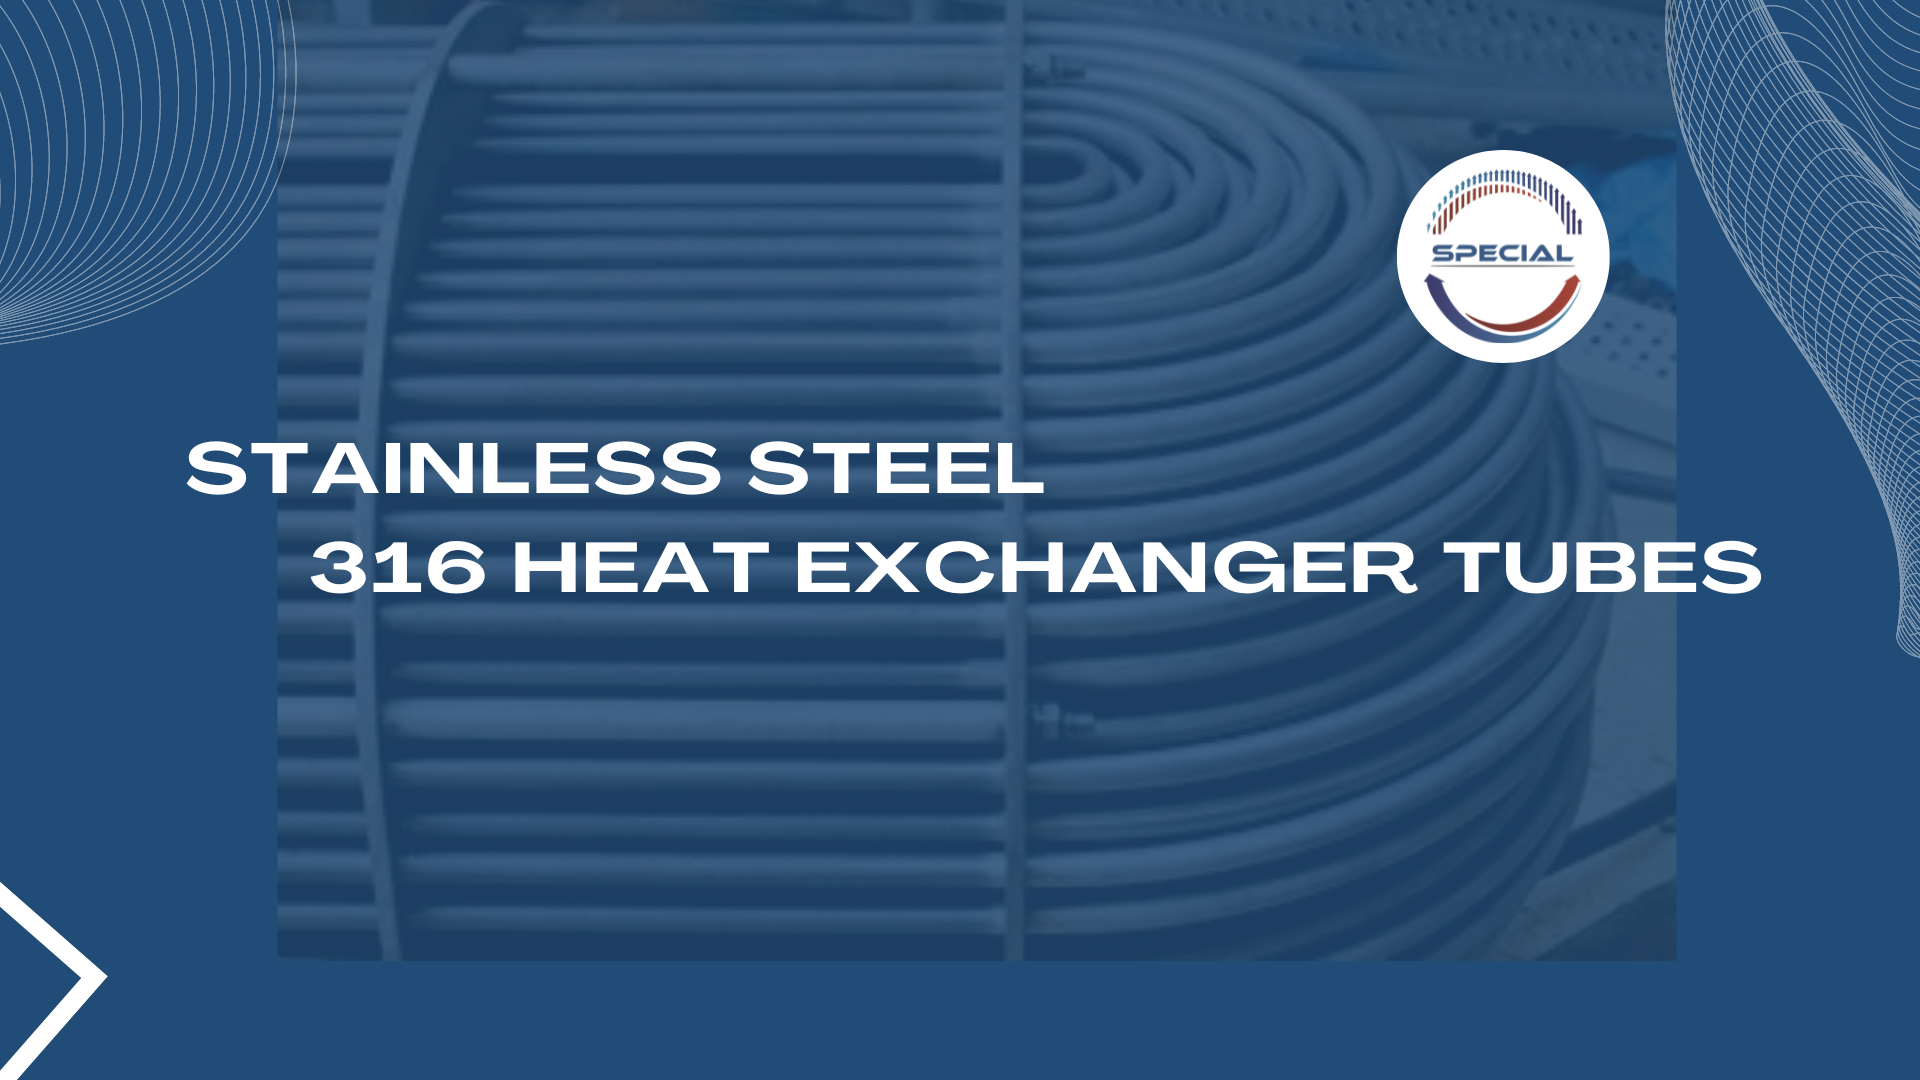 stainless steel 316 heat exchanger tubes